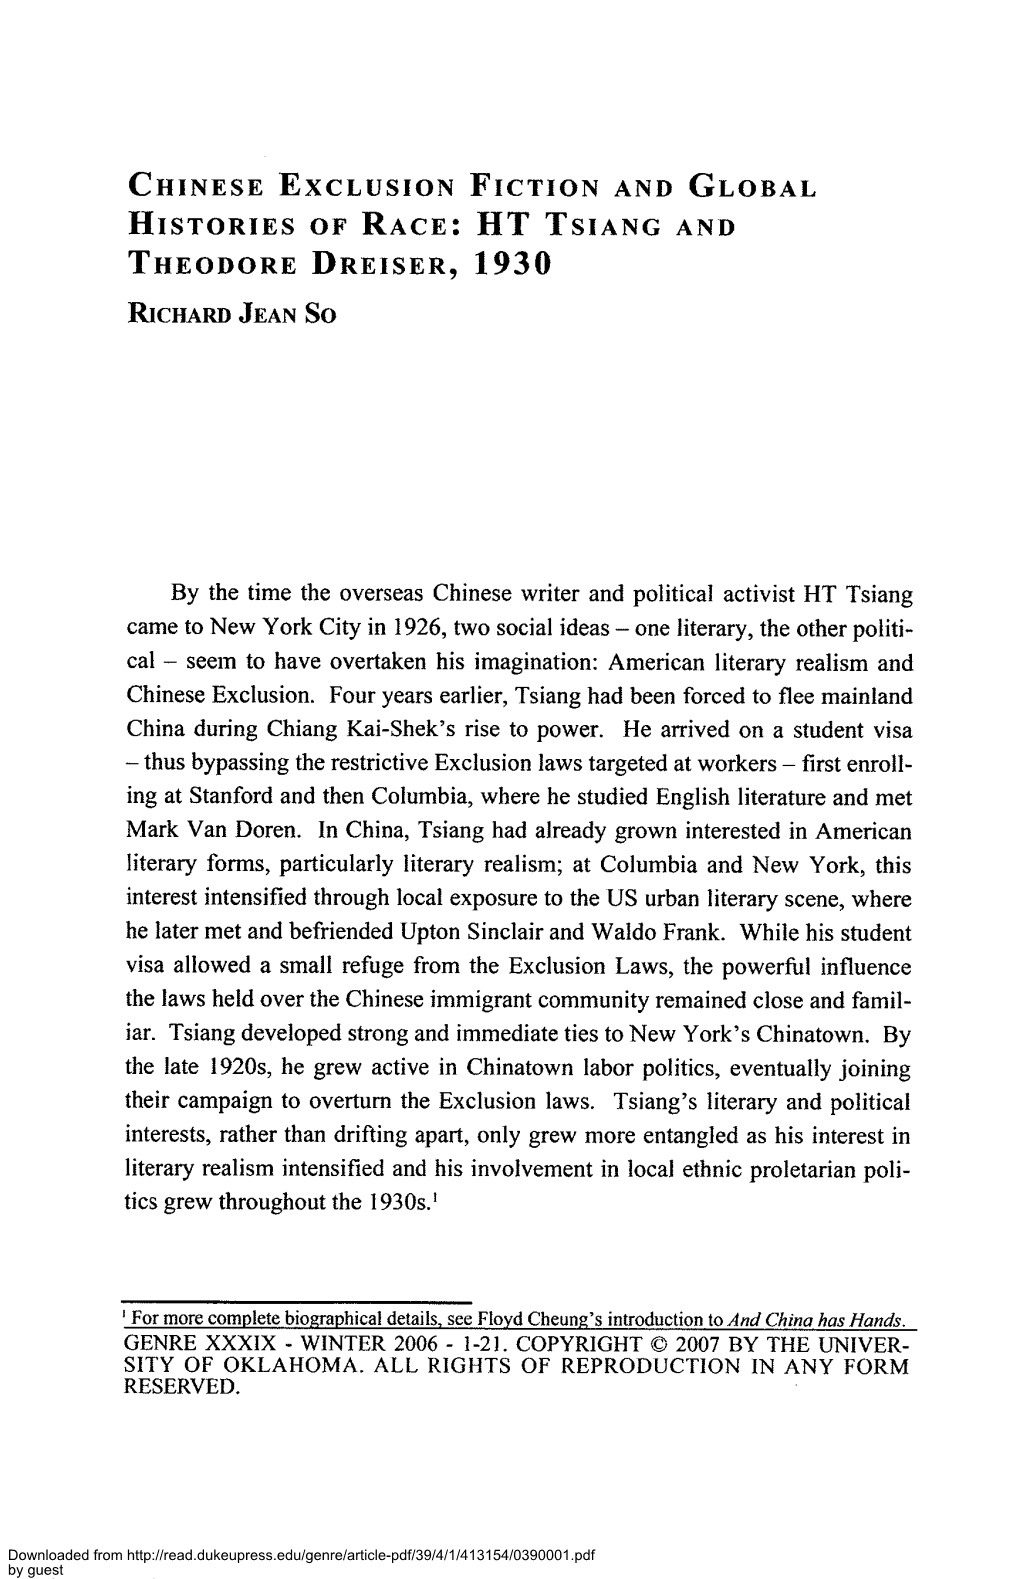 Chinese Exclusion Fiction and Global Histories of Race: Ht Tsiang and Theodore Dreiser, 1930